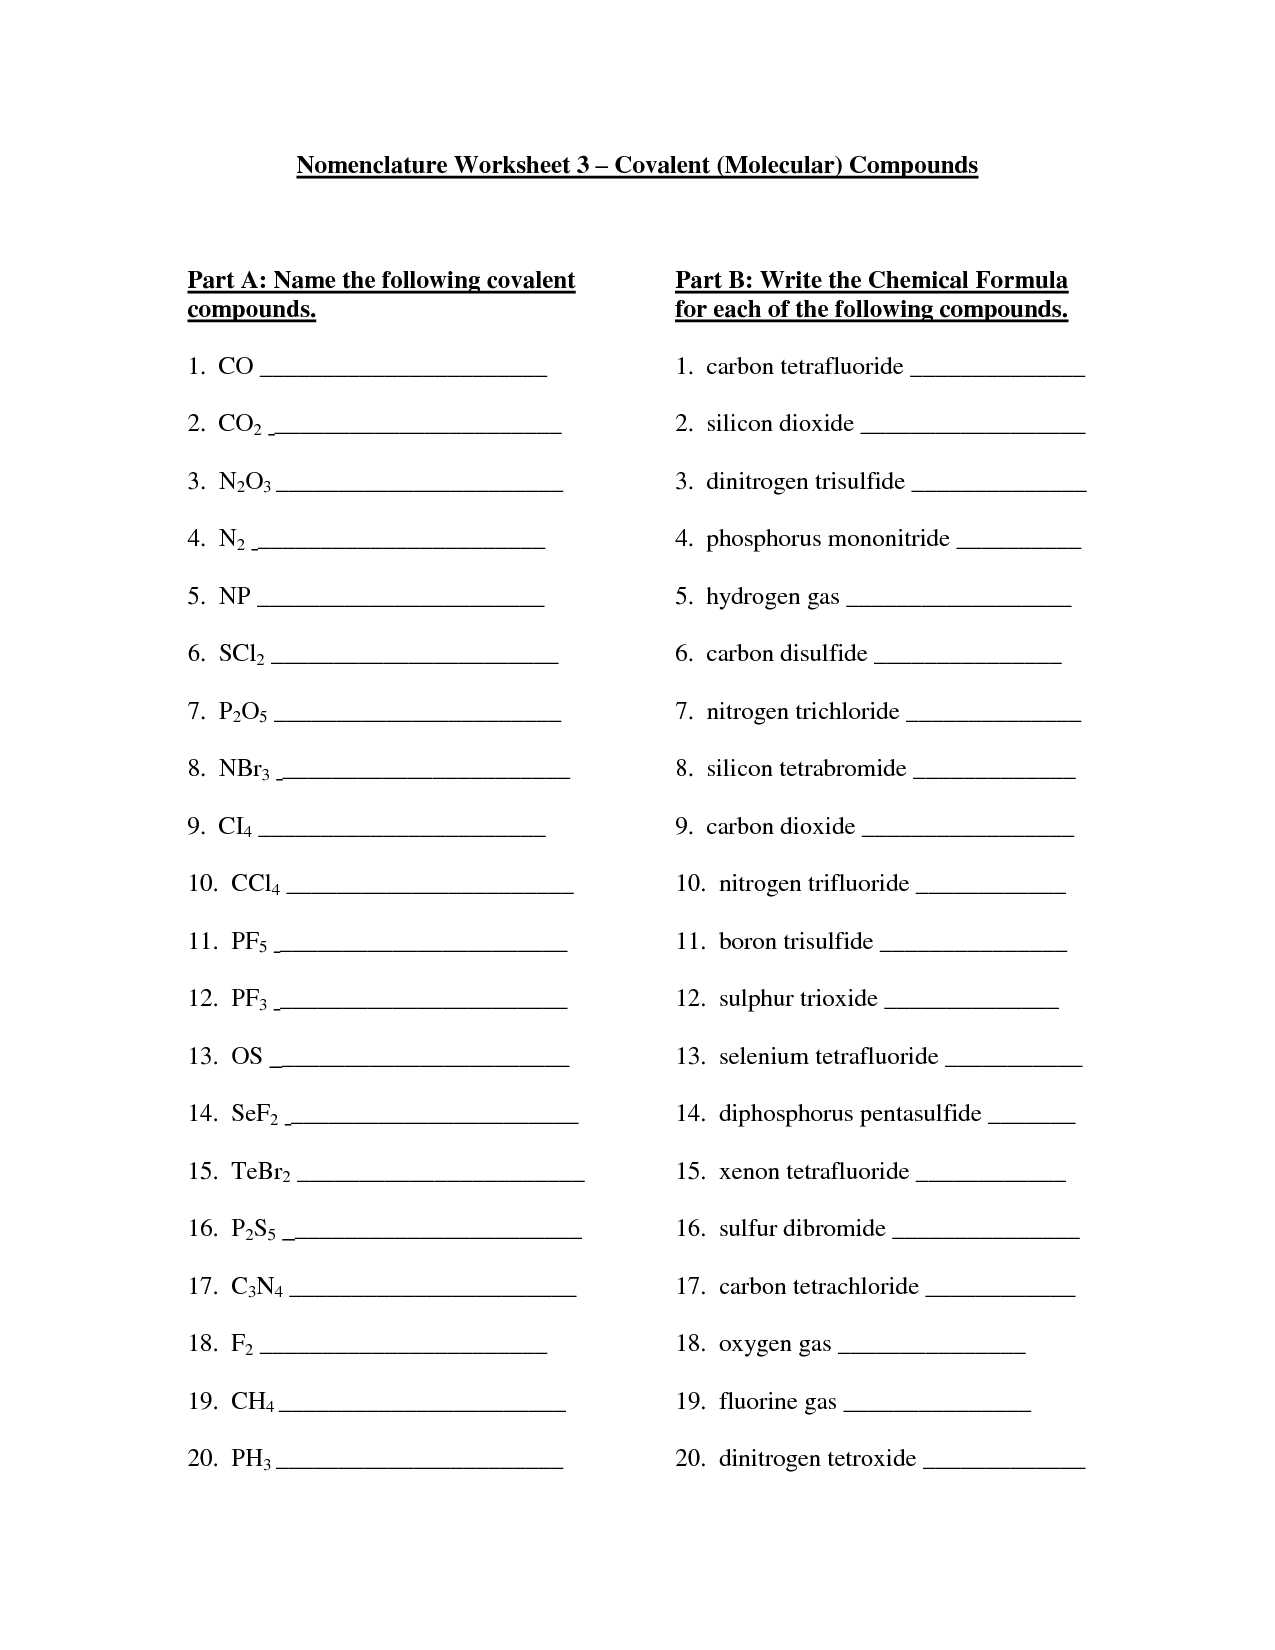 Naming Covalent Compounds Worksheet Answers as Well as Naming Ionic and Covalent Pounds Worksheet No 2 or Types Of